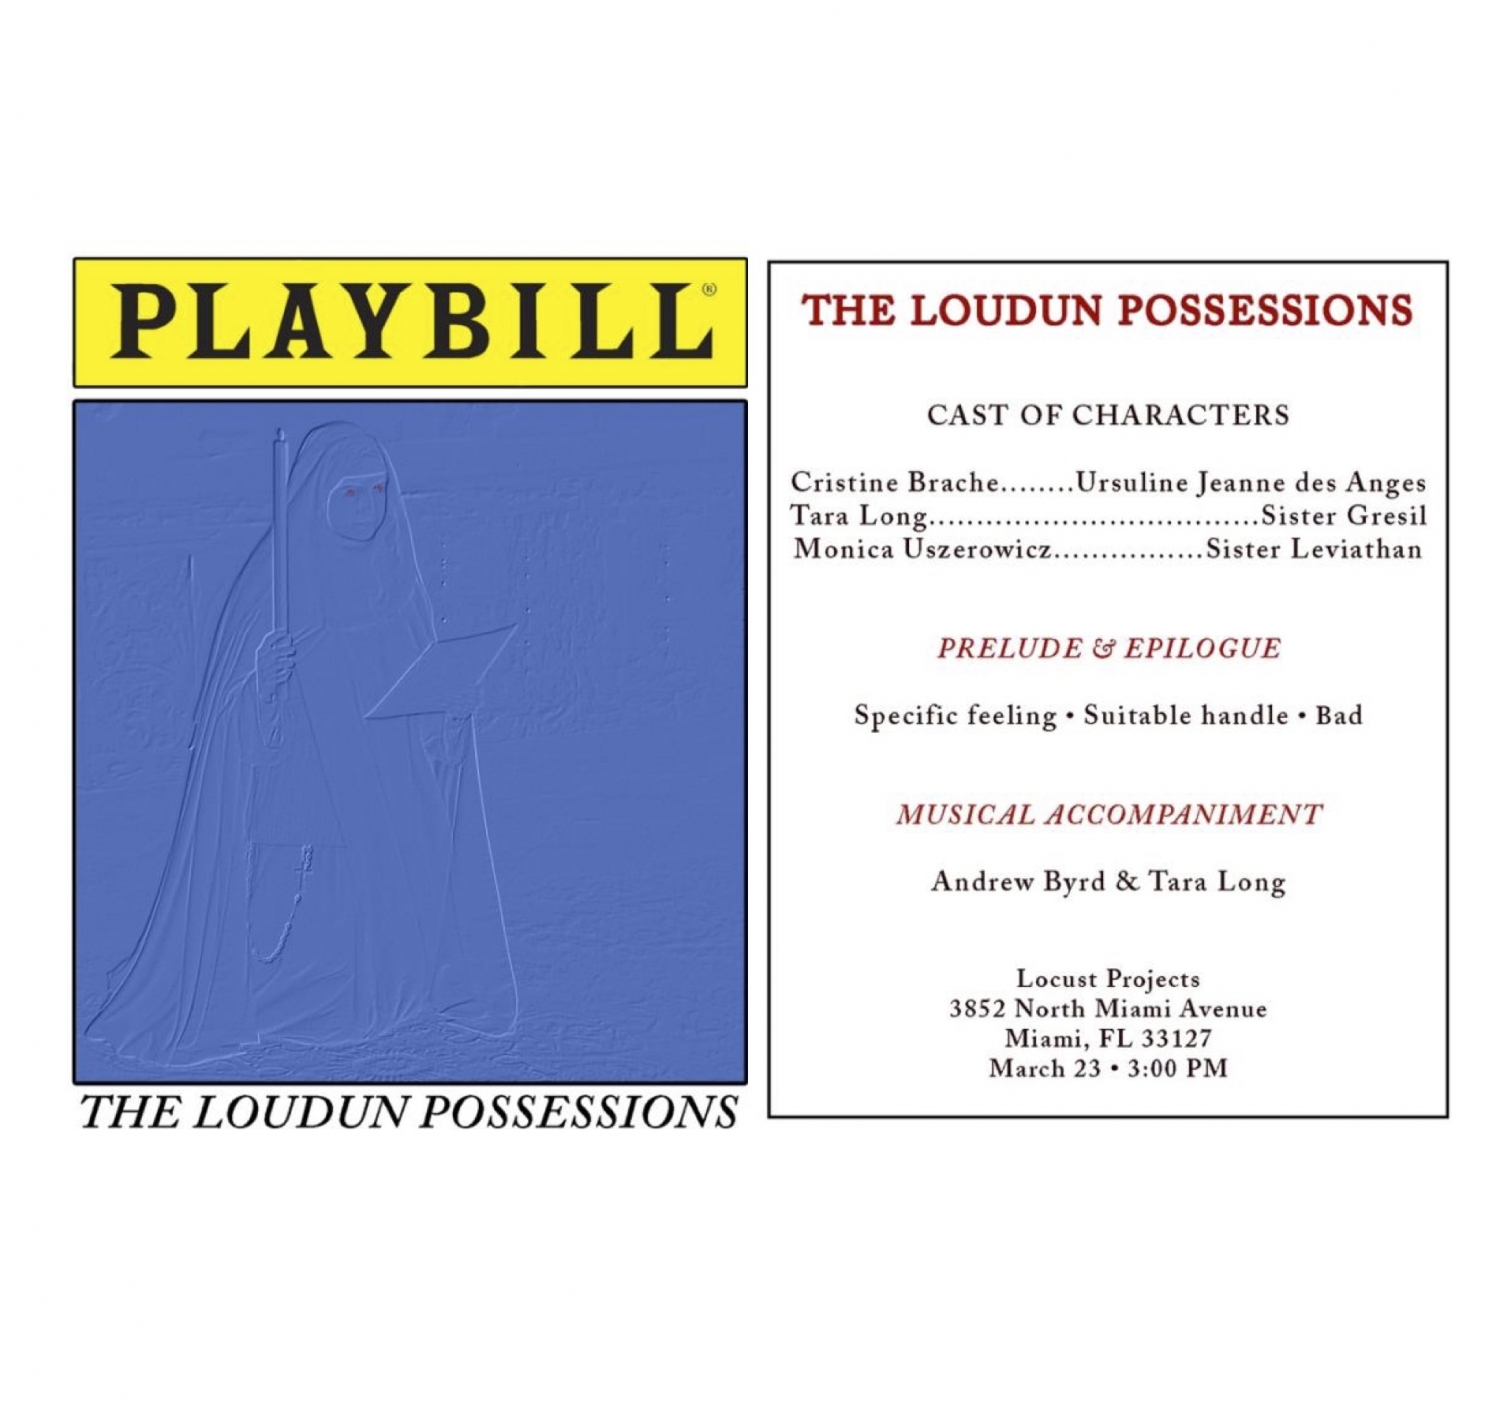 TALK and PERFORMANCE: The Loudun Possessions